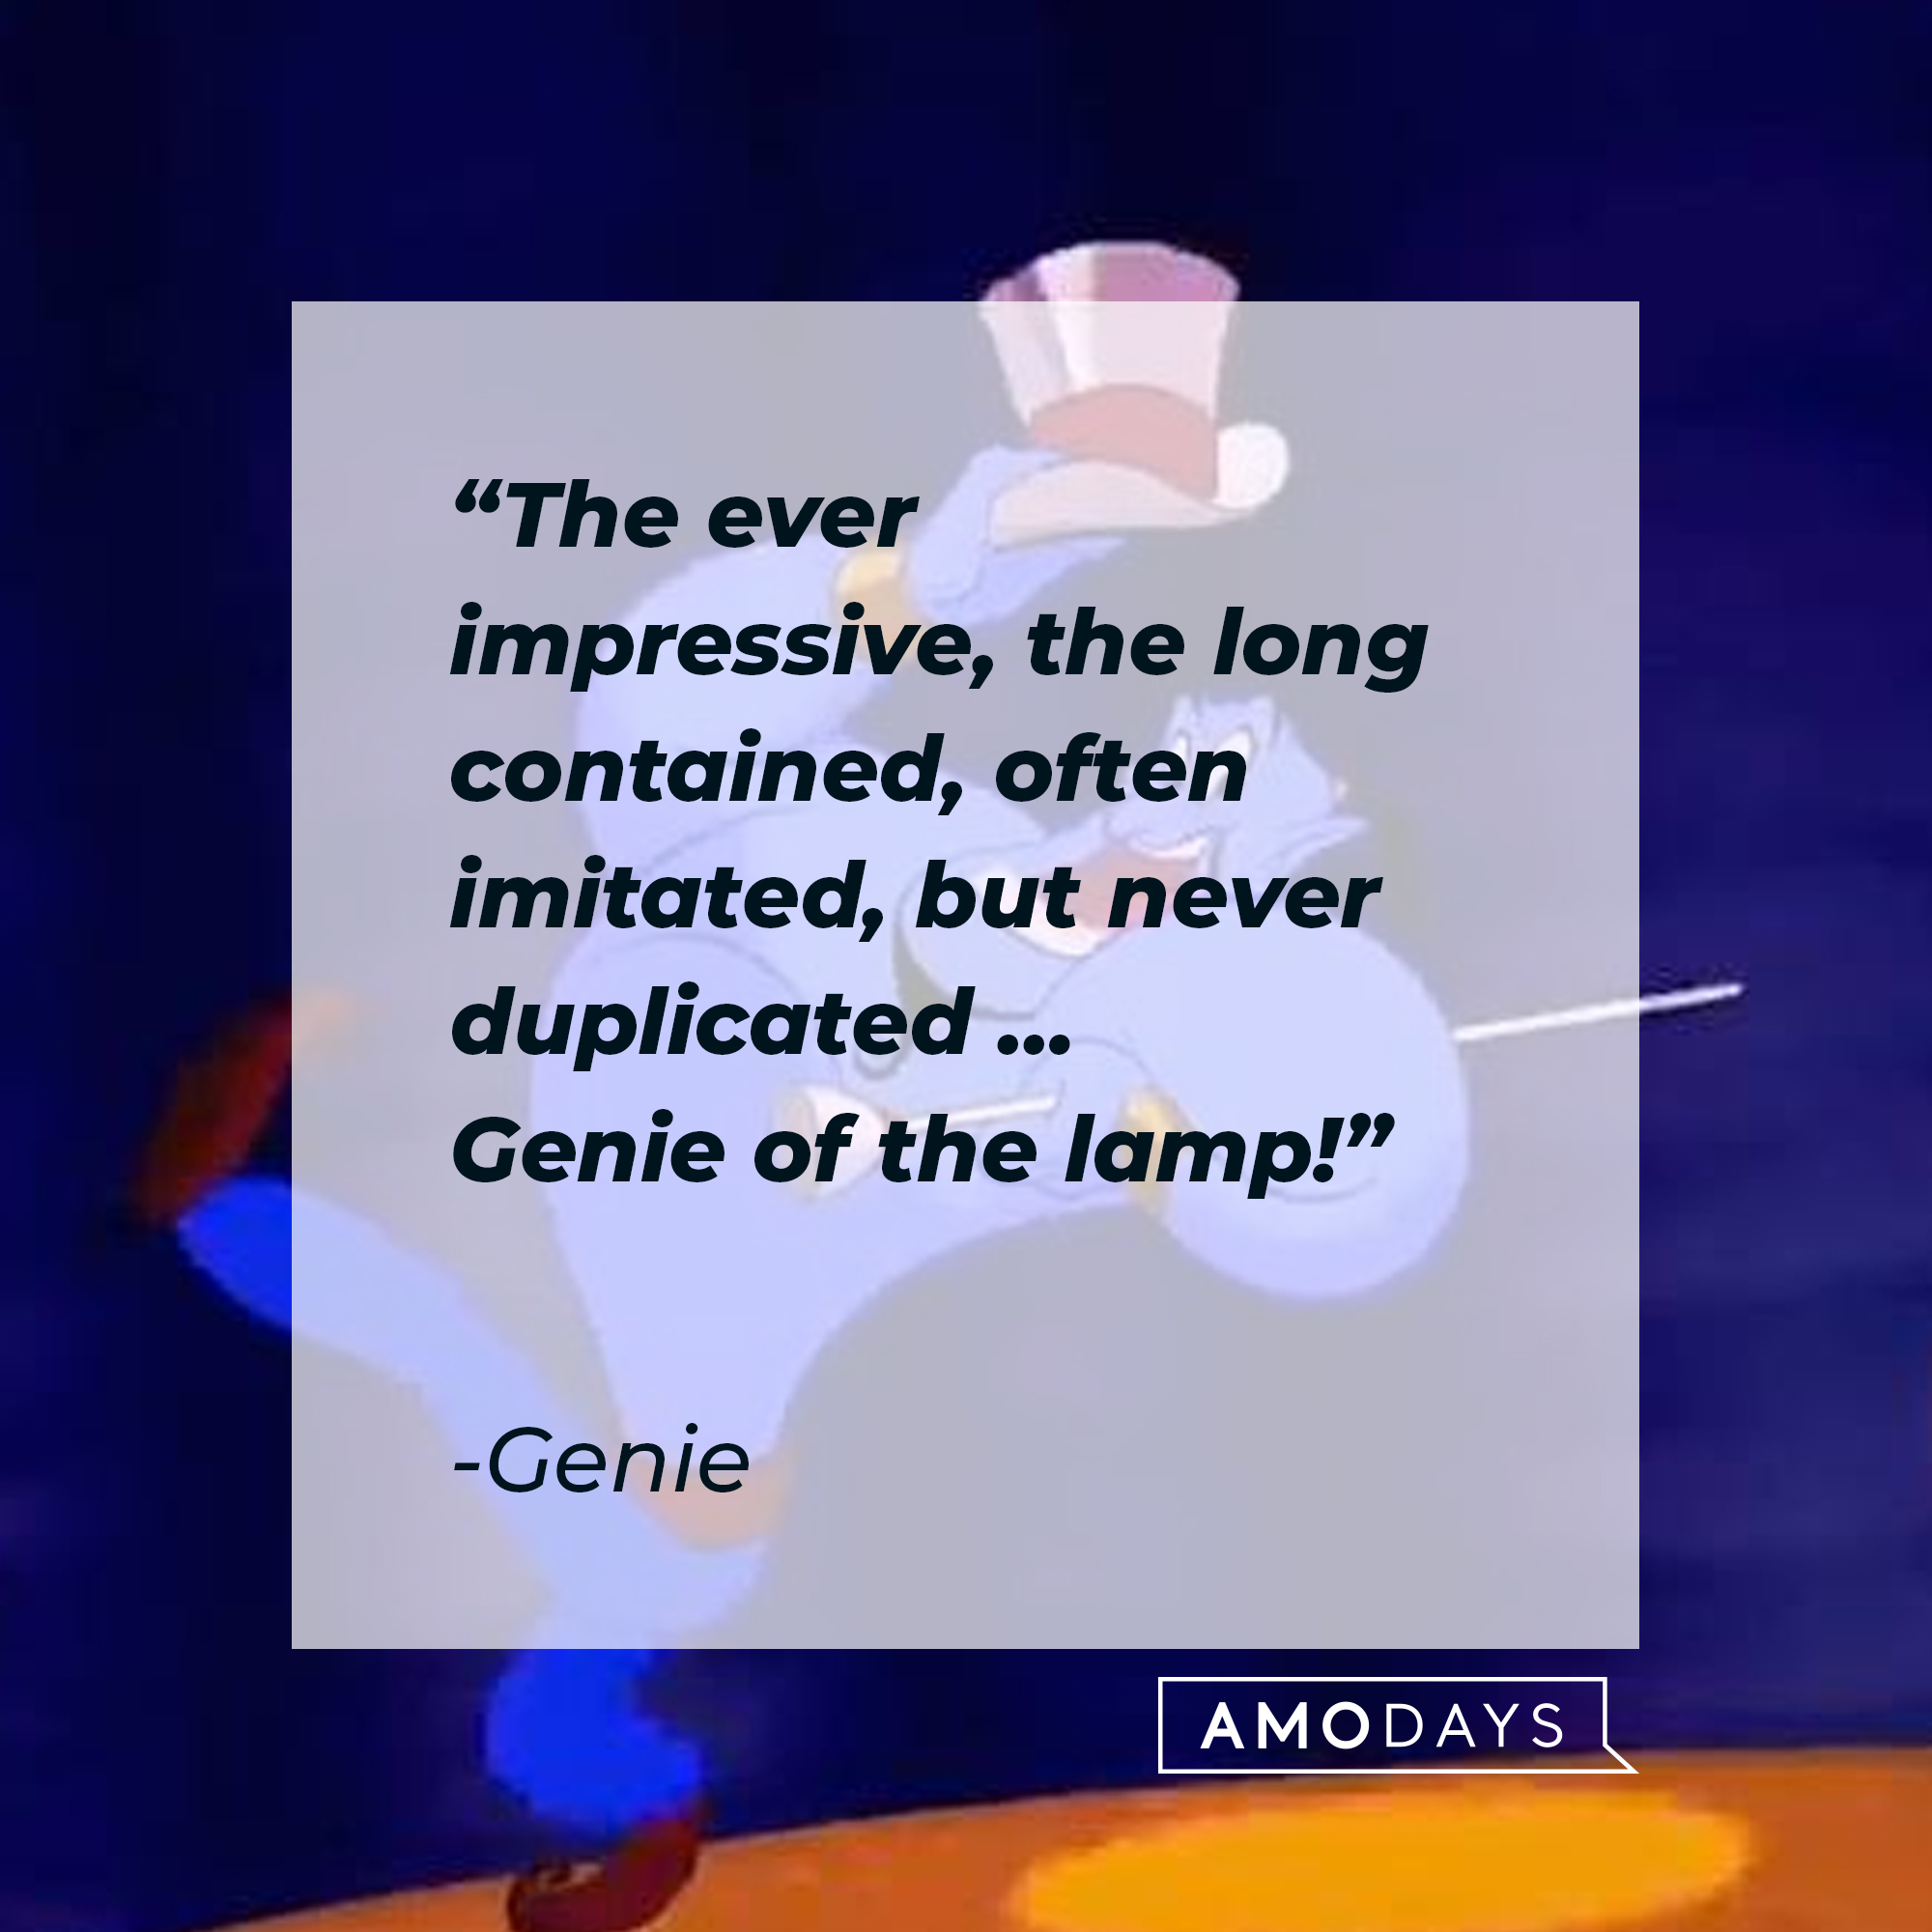 The animated Genie with his quote: “The ever impressive, the long contained, often imitated, but never duplicated...Genie of the lamp!" | Source: Facebook.com/DisneyAladdin